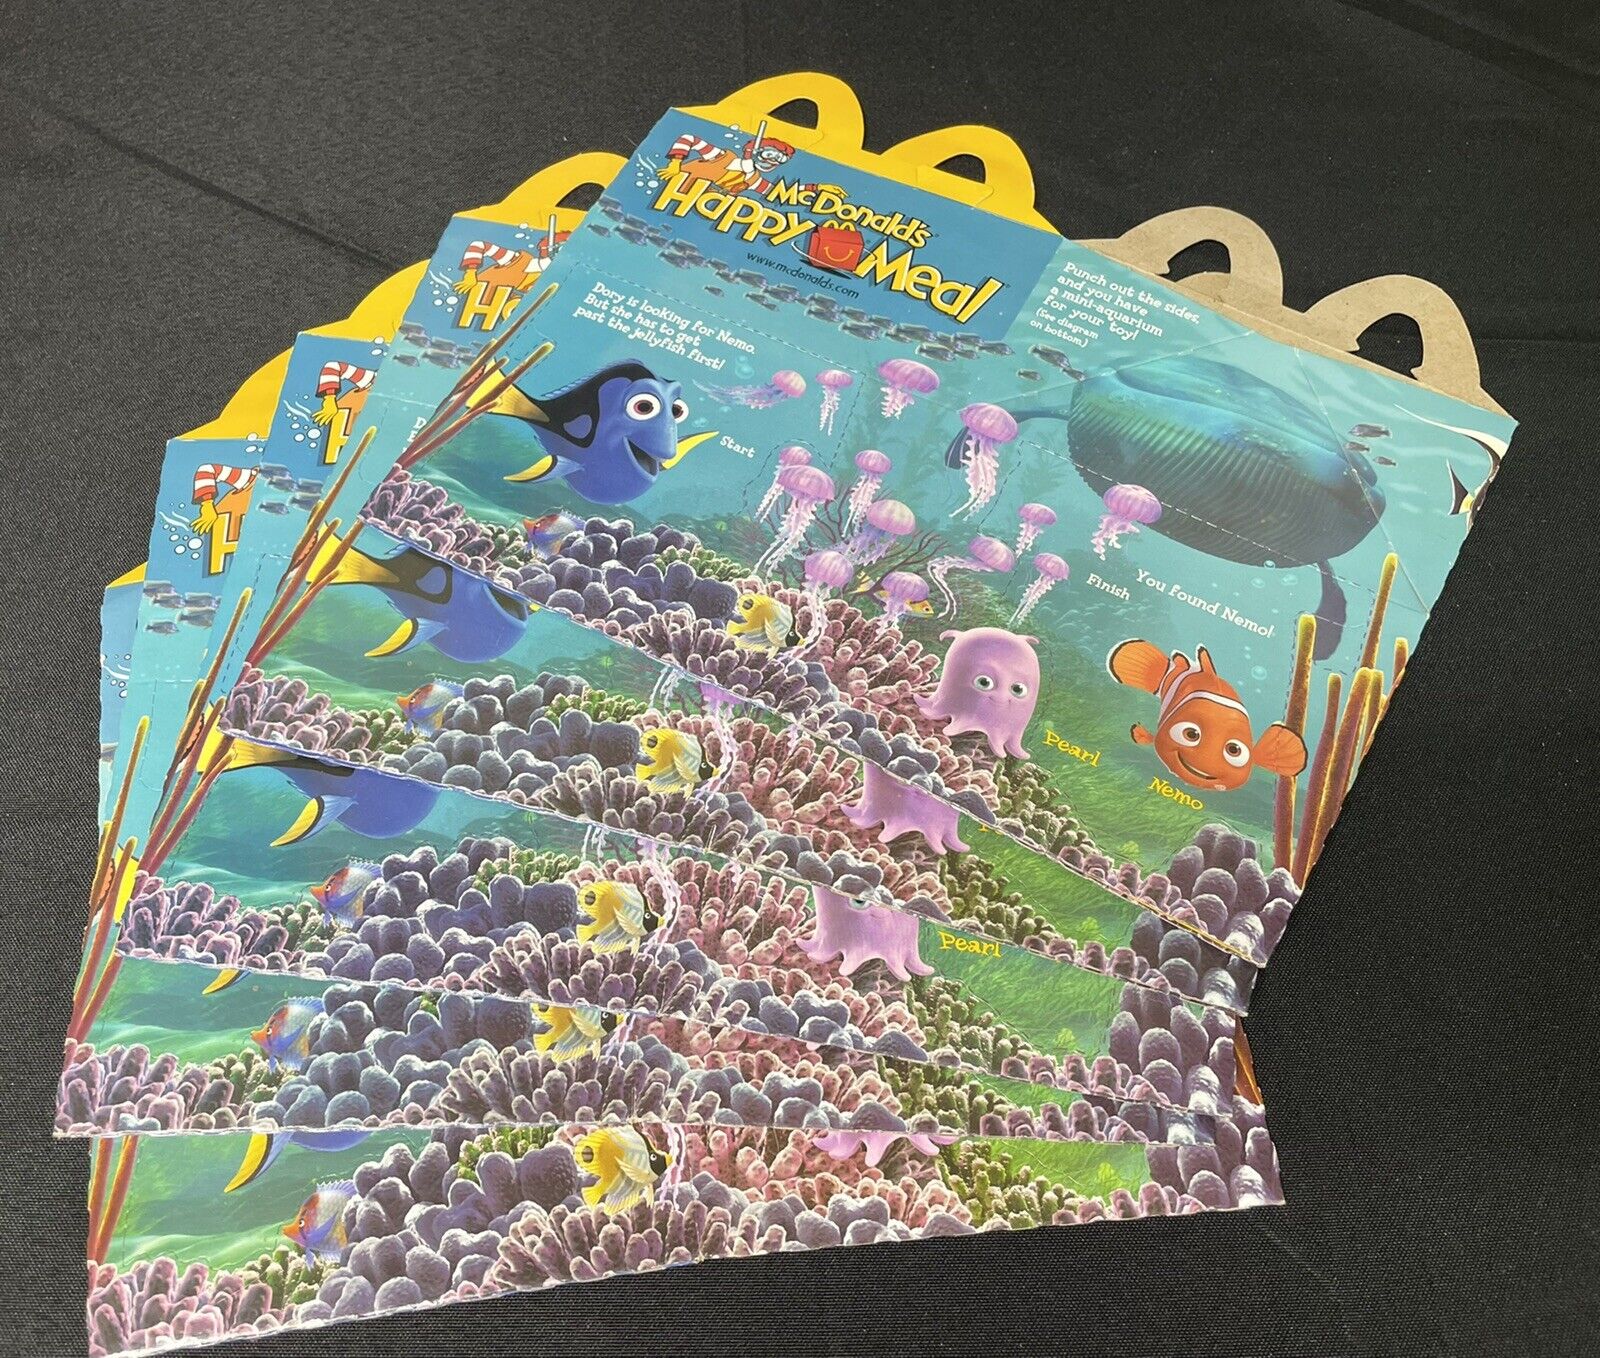 LOT OF FIVE FINDING NEMO MCDONALDS HAPPY MEAL BOXES NOS